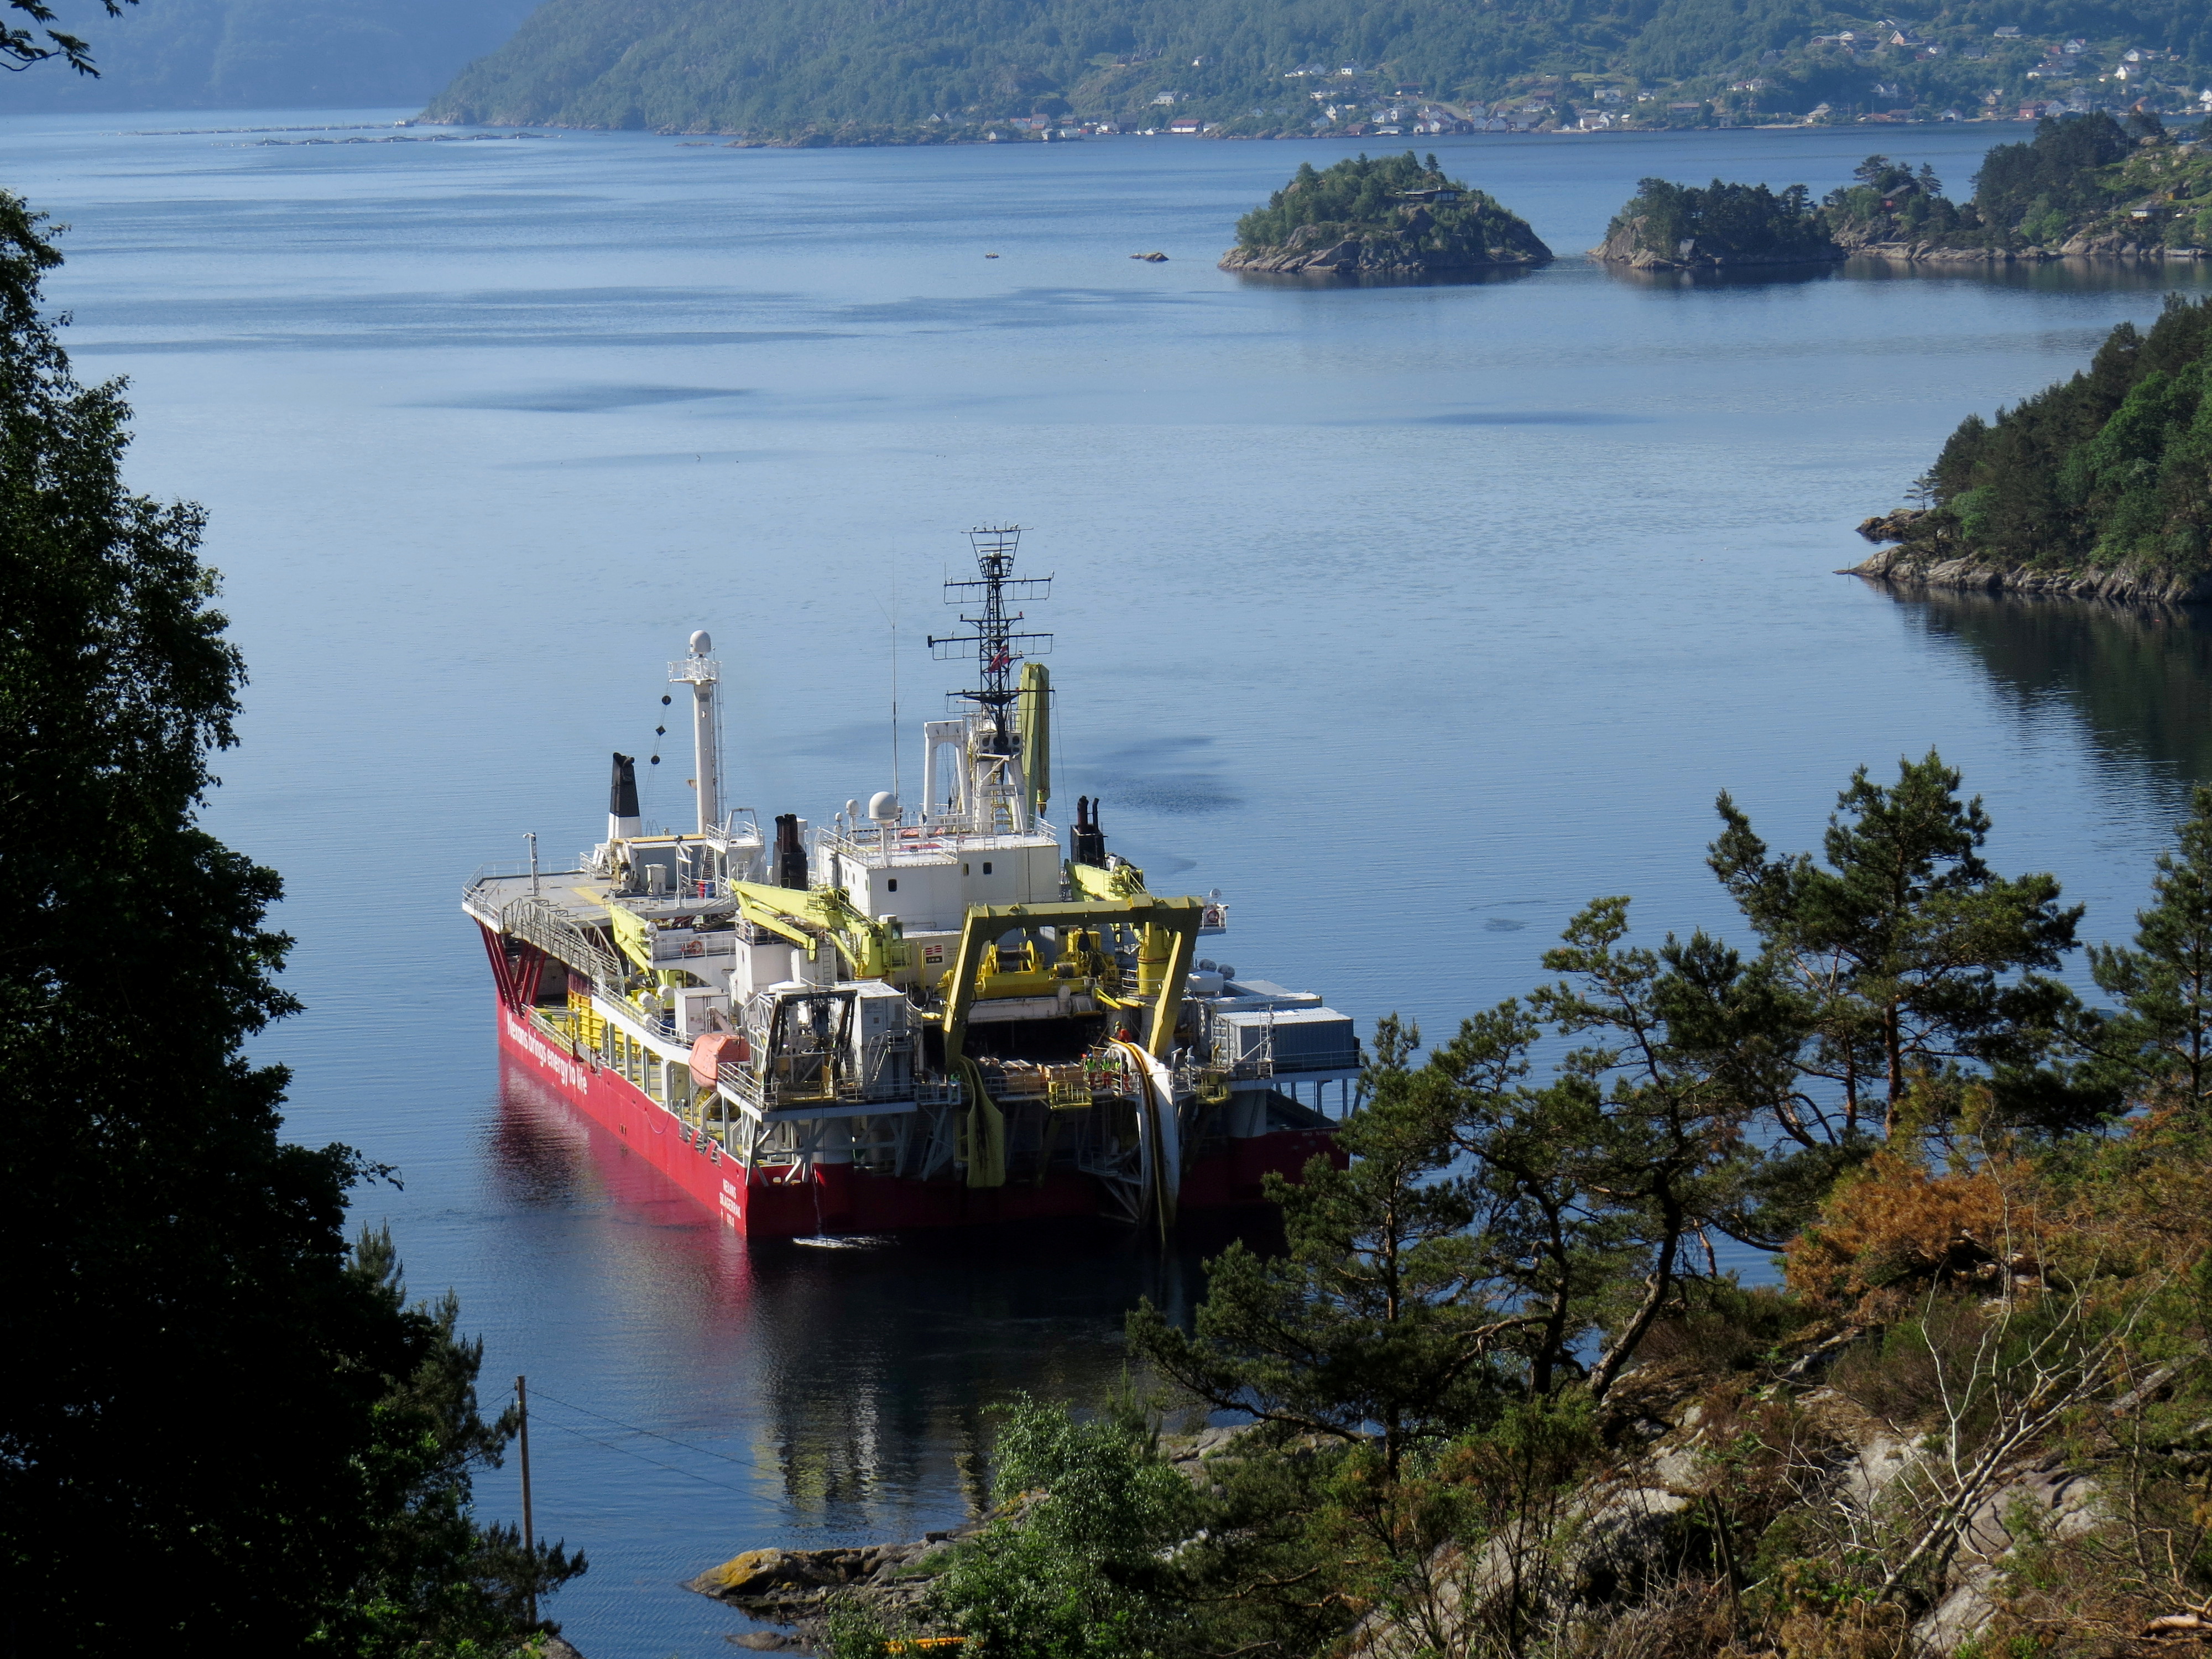 Workers on Nexans Skagerrak vessel lay a NordLink subsea interconnector power cable to connect Norway and Germany at the Vollesfjord fjord near Flekkefjord, Norway